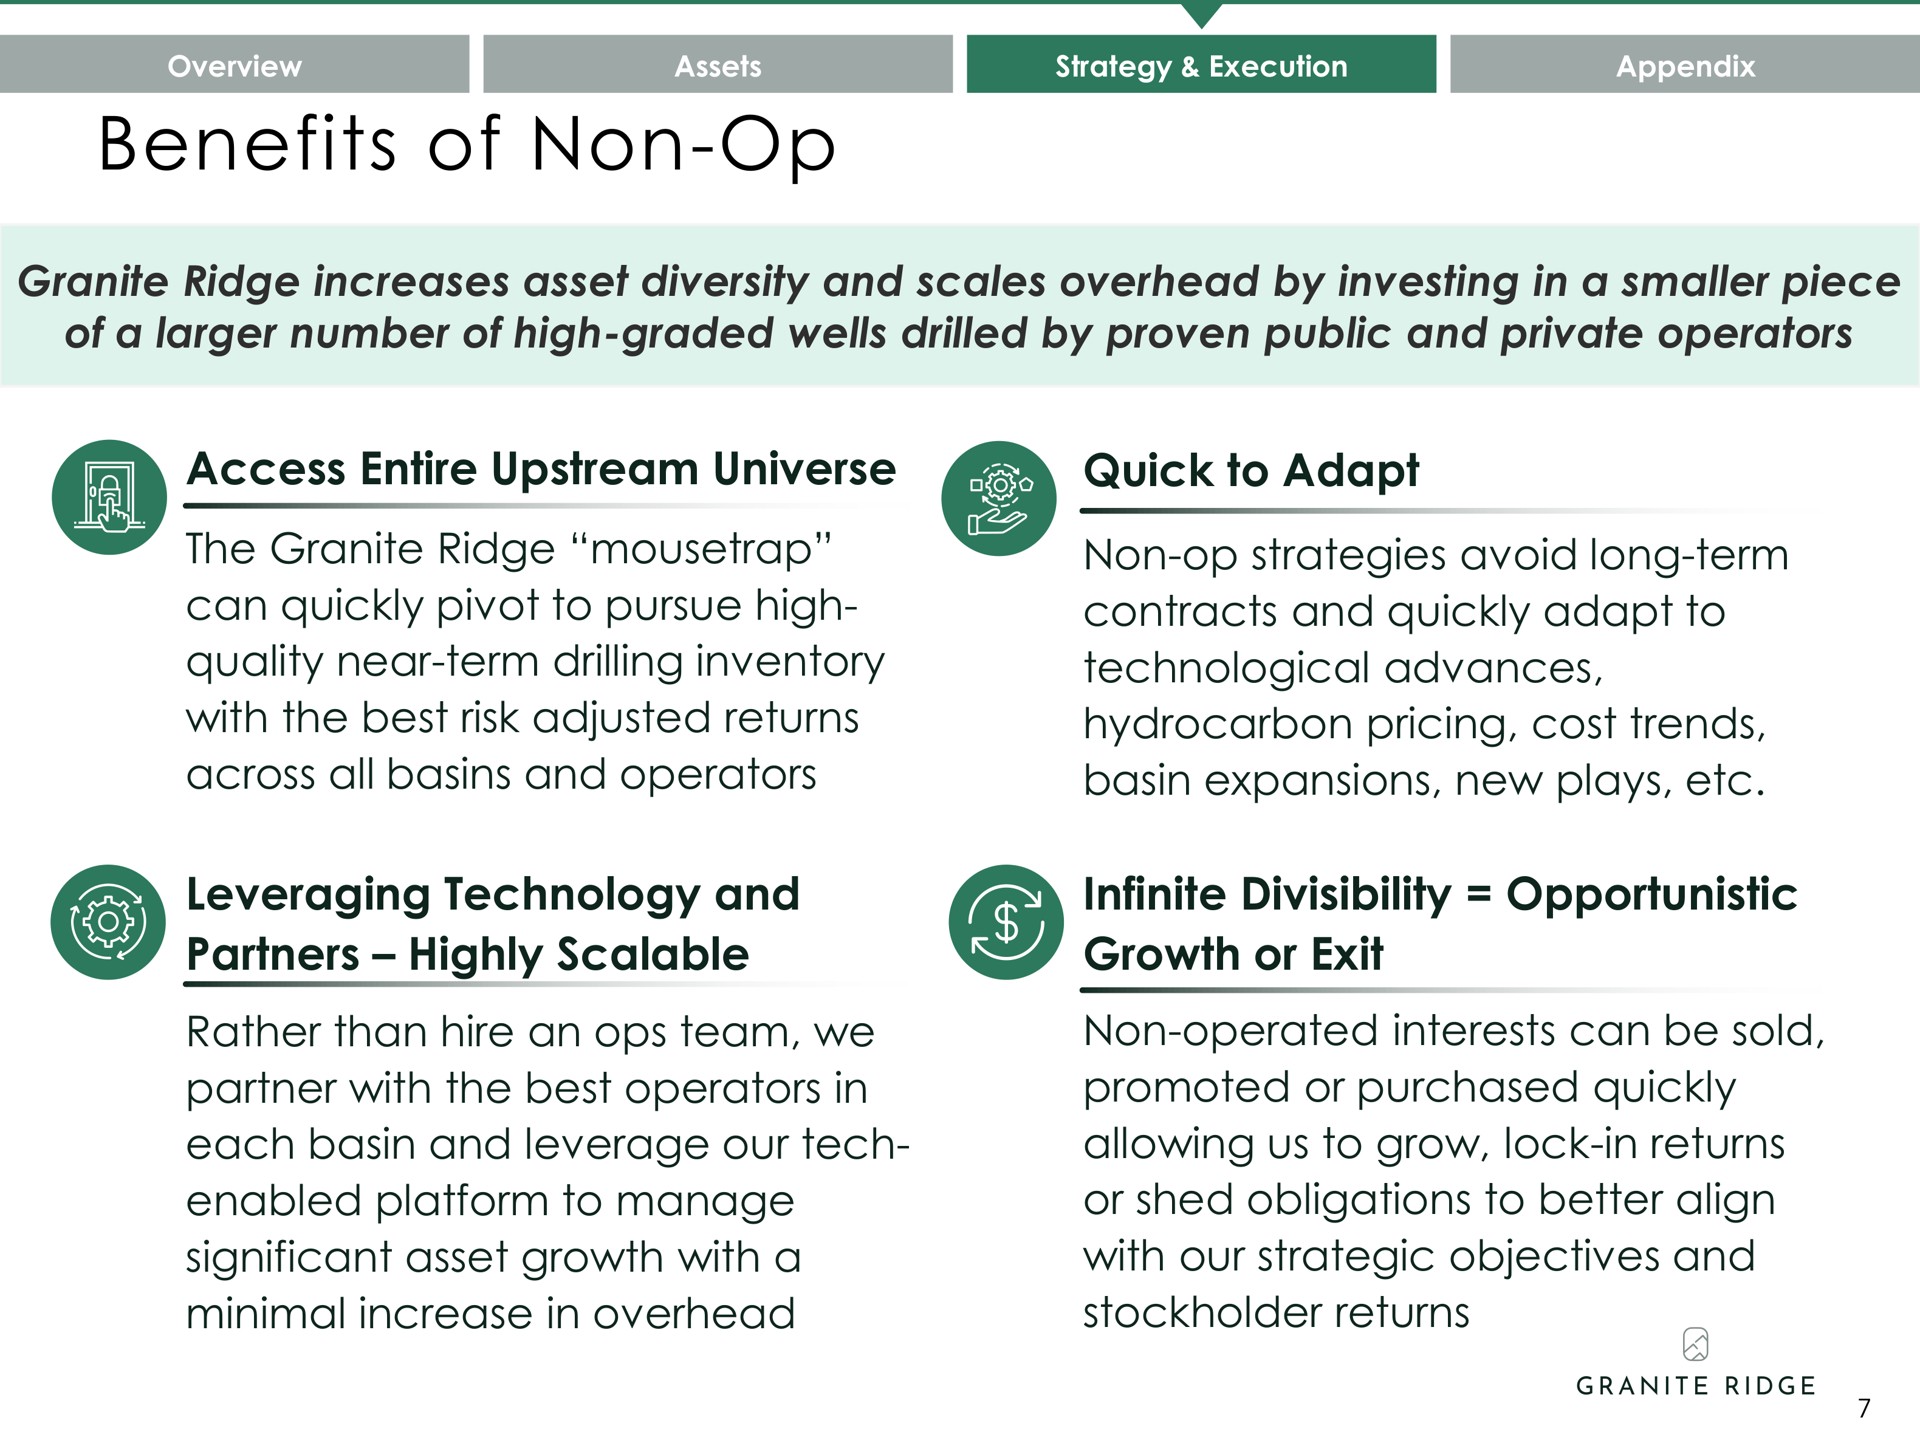 benefits of non access entire upstream universe quick to adapt leveraging technology and partners highly scalable infinite divisibility opportunistic growth or exit | Granite Ridge